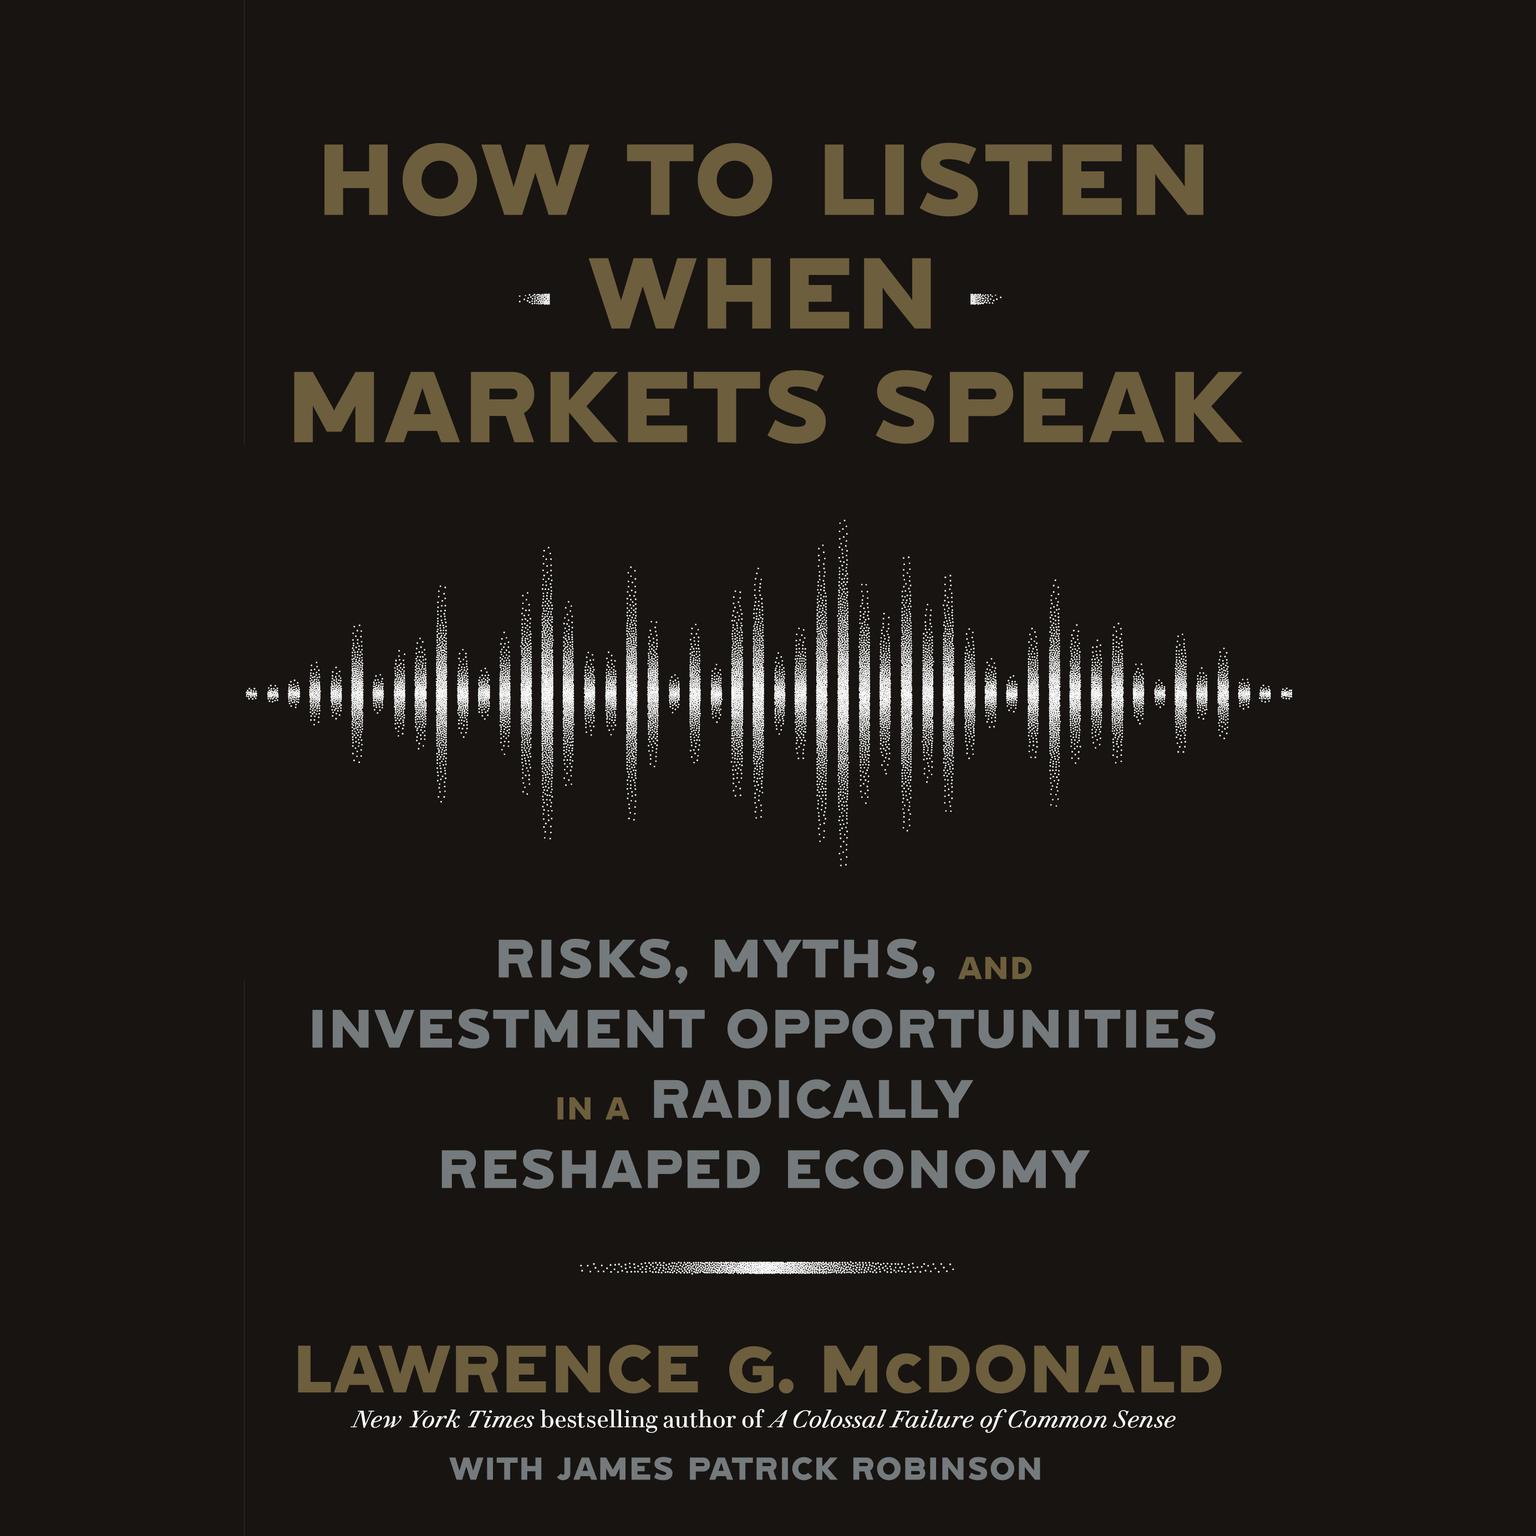 How to Listen When Markets Speak: Risks, Myths, and Investment Opportunities in a Radically Reshaped Economy Audiobook, by Lawrence G. McDonald